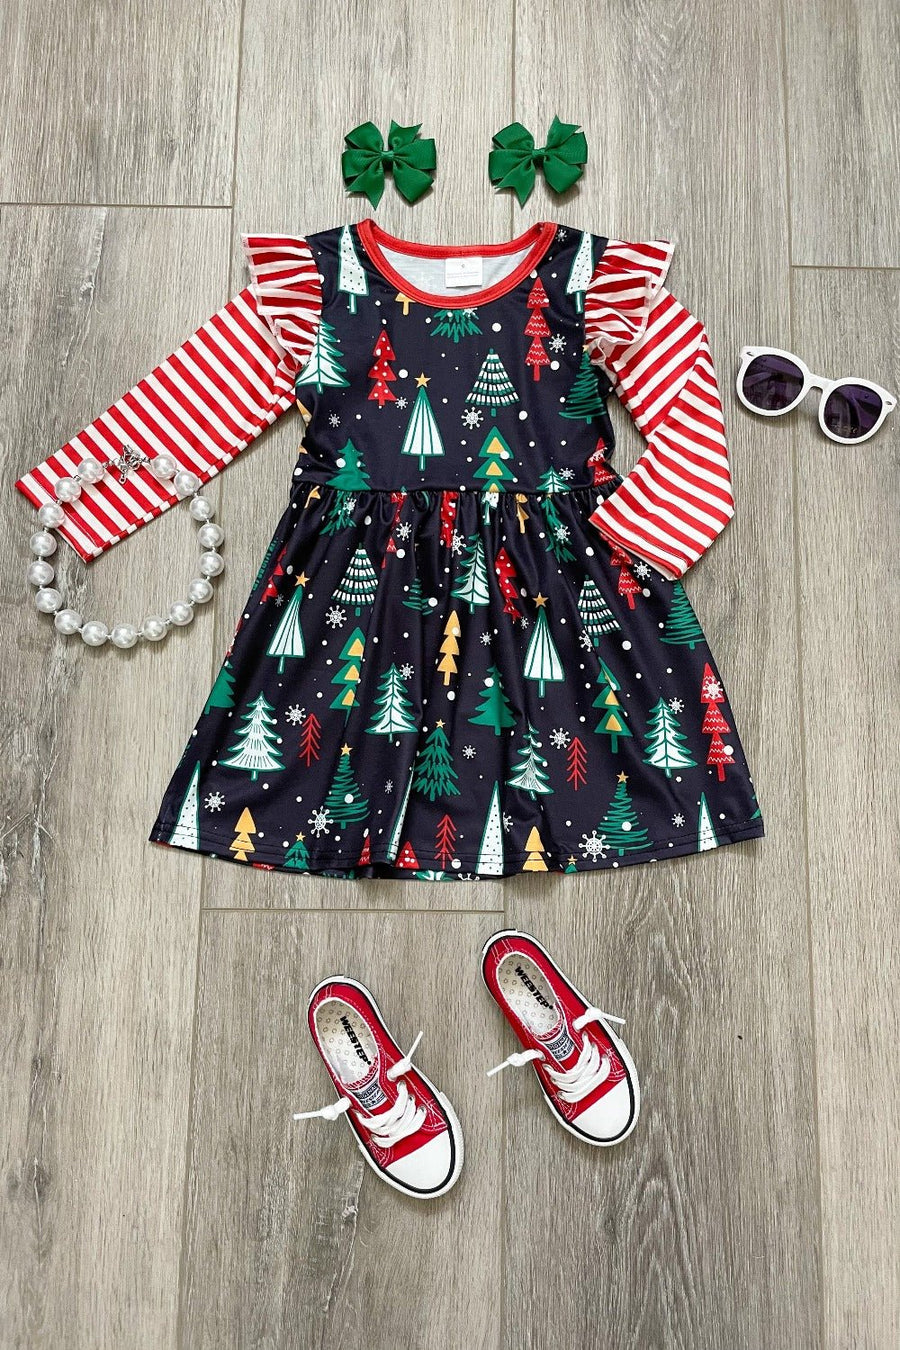 Christmas Snowfall Boutique Dress, girls boutique clothing – Rylee